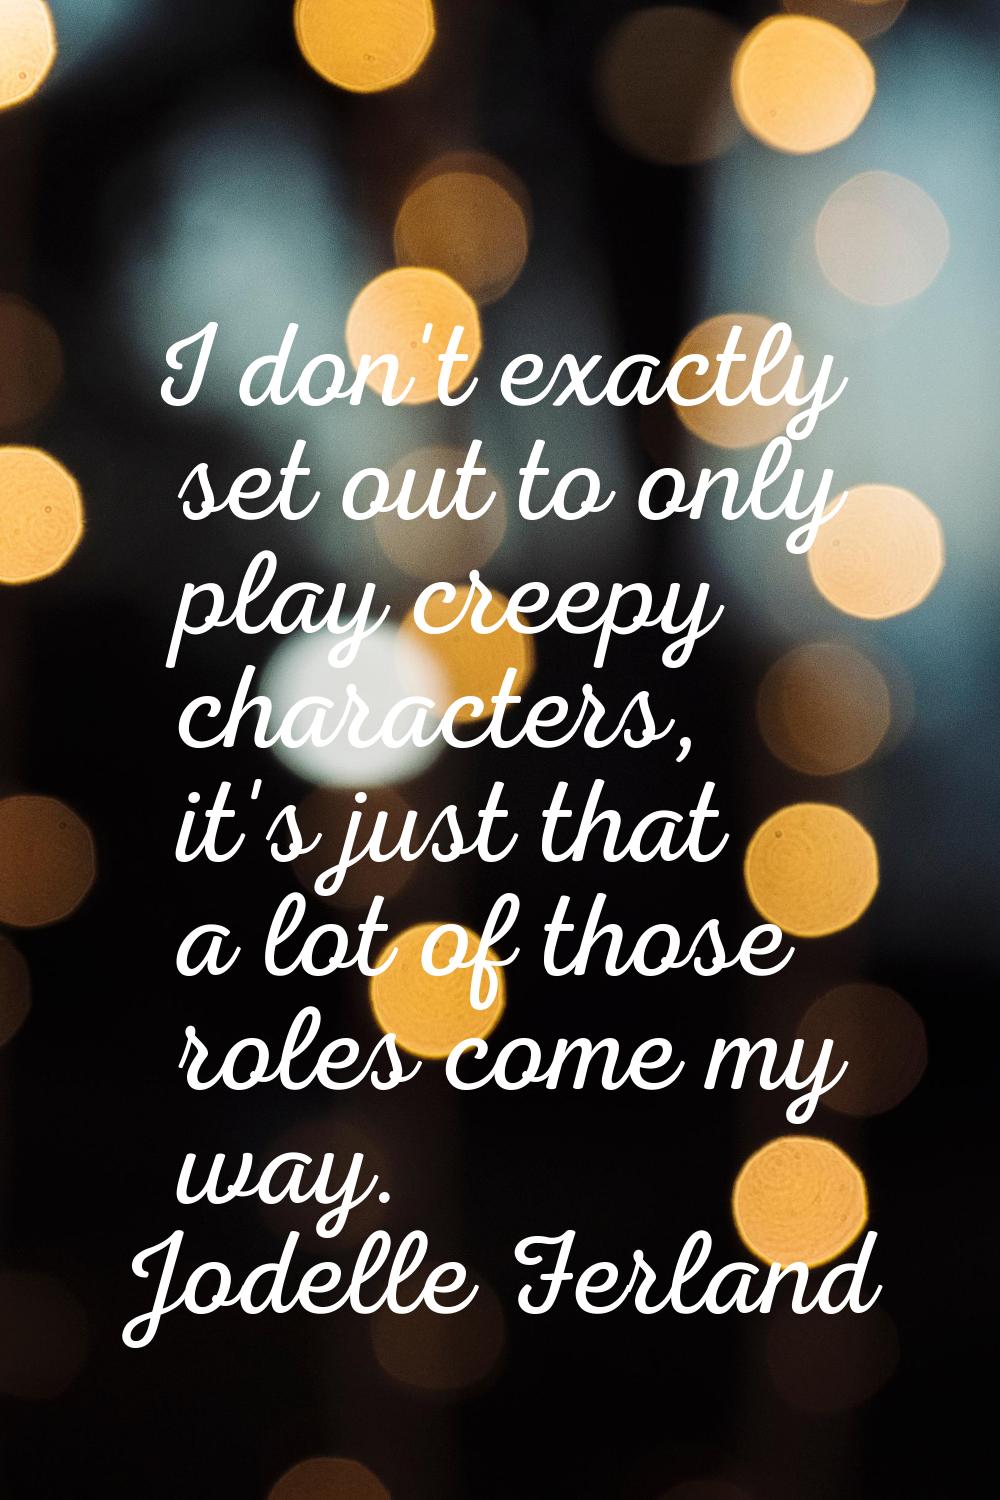 I don't exactly set out to only play creepy characters, it's just that a lot of those roles come my